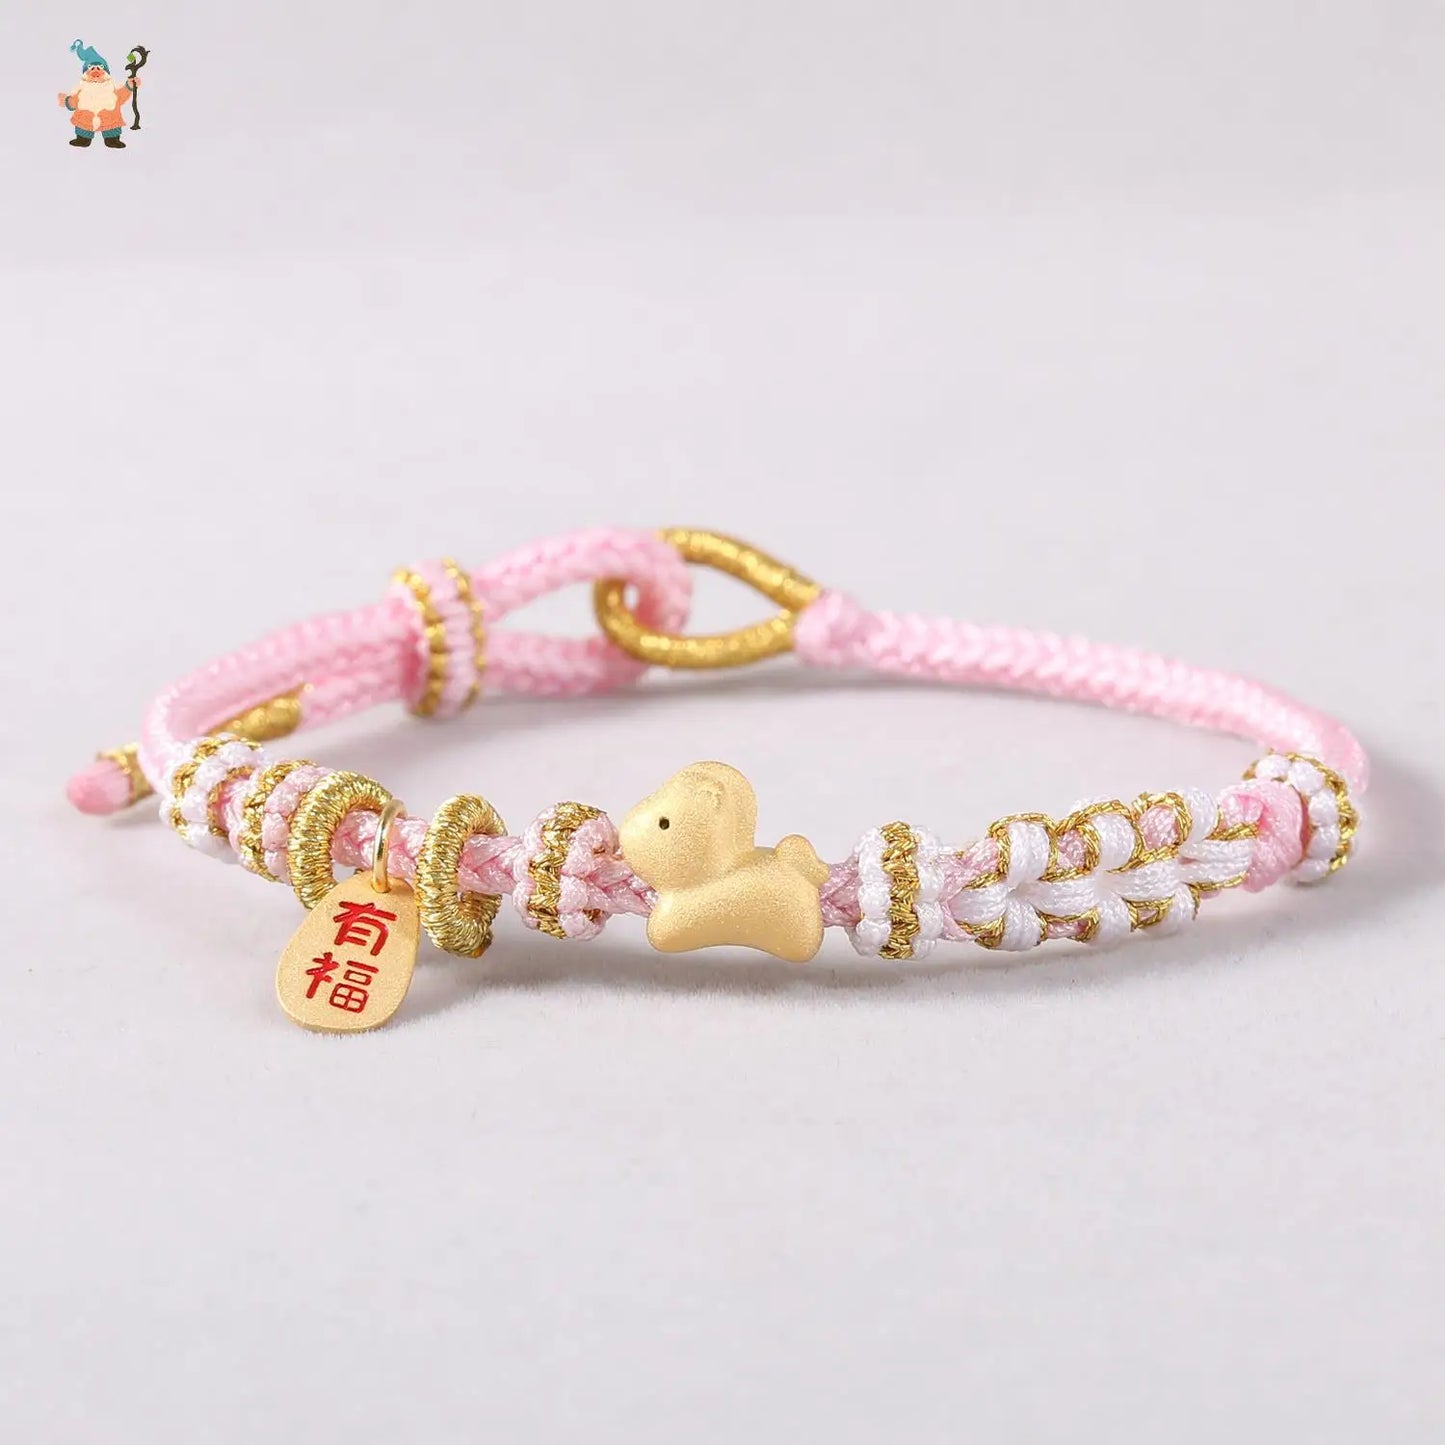 Chinese Zodiac Bracelet S925 Sterling Silver Frosted Birthday Year Little Peach Blossom Woven Red Hand Rope Female Birthday Gift